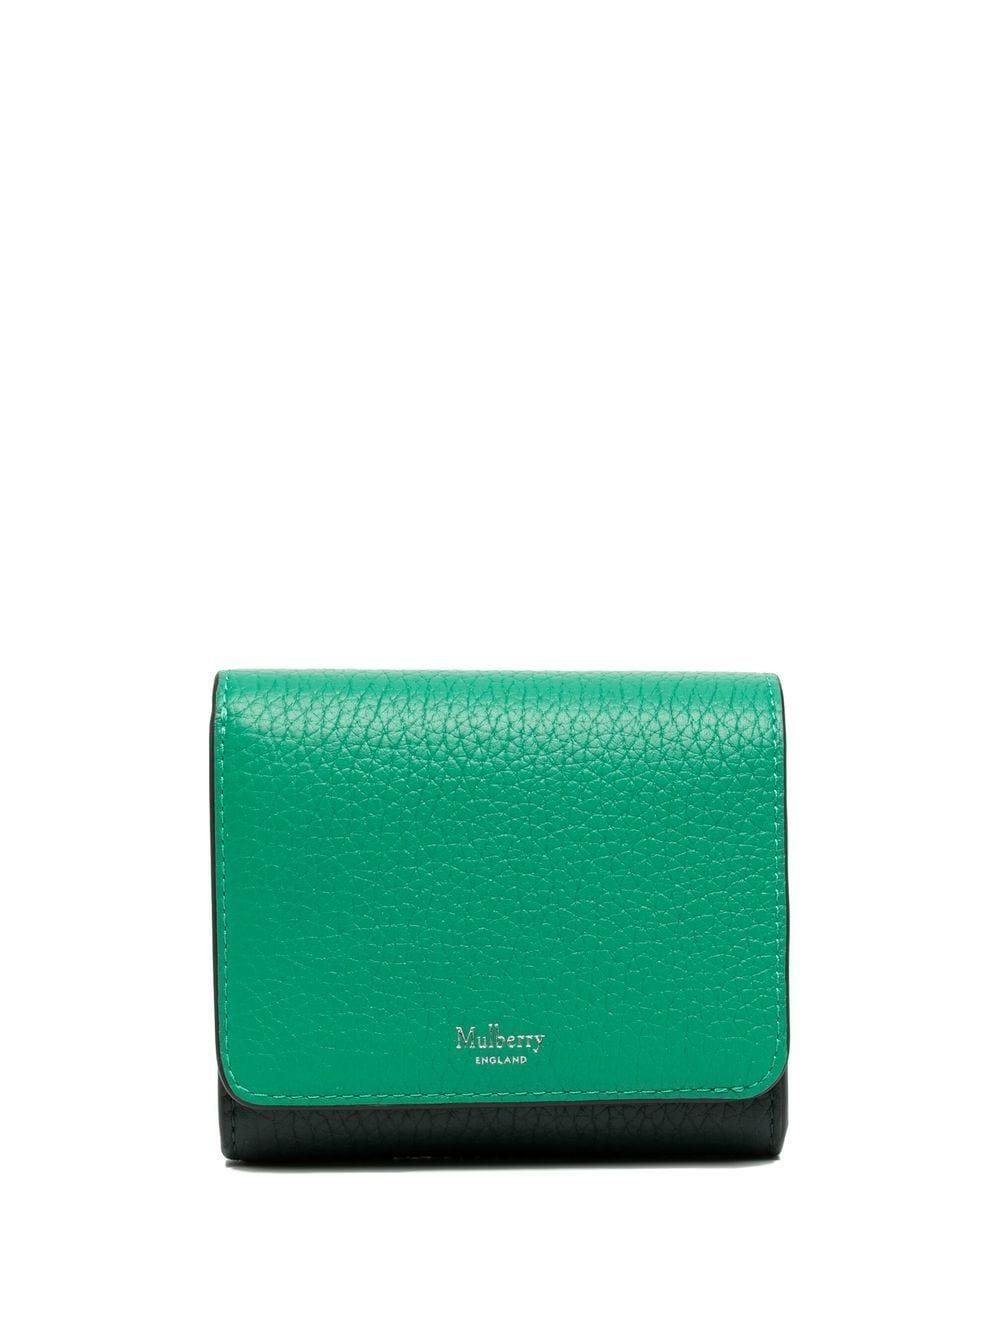 Mulberry Small Continental French Purse - Farfetch